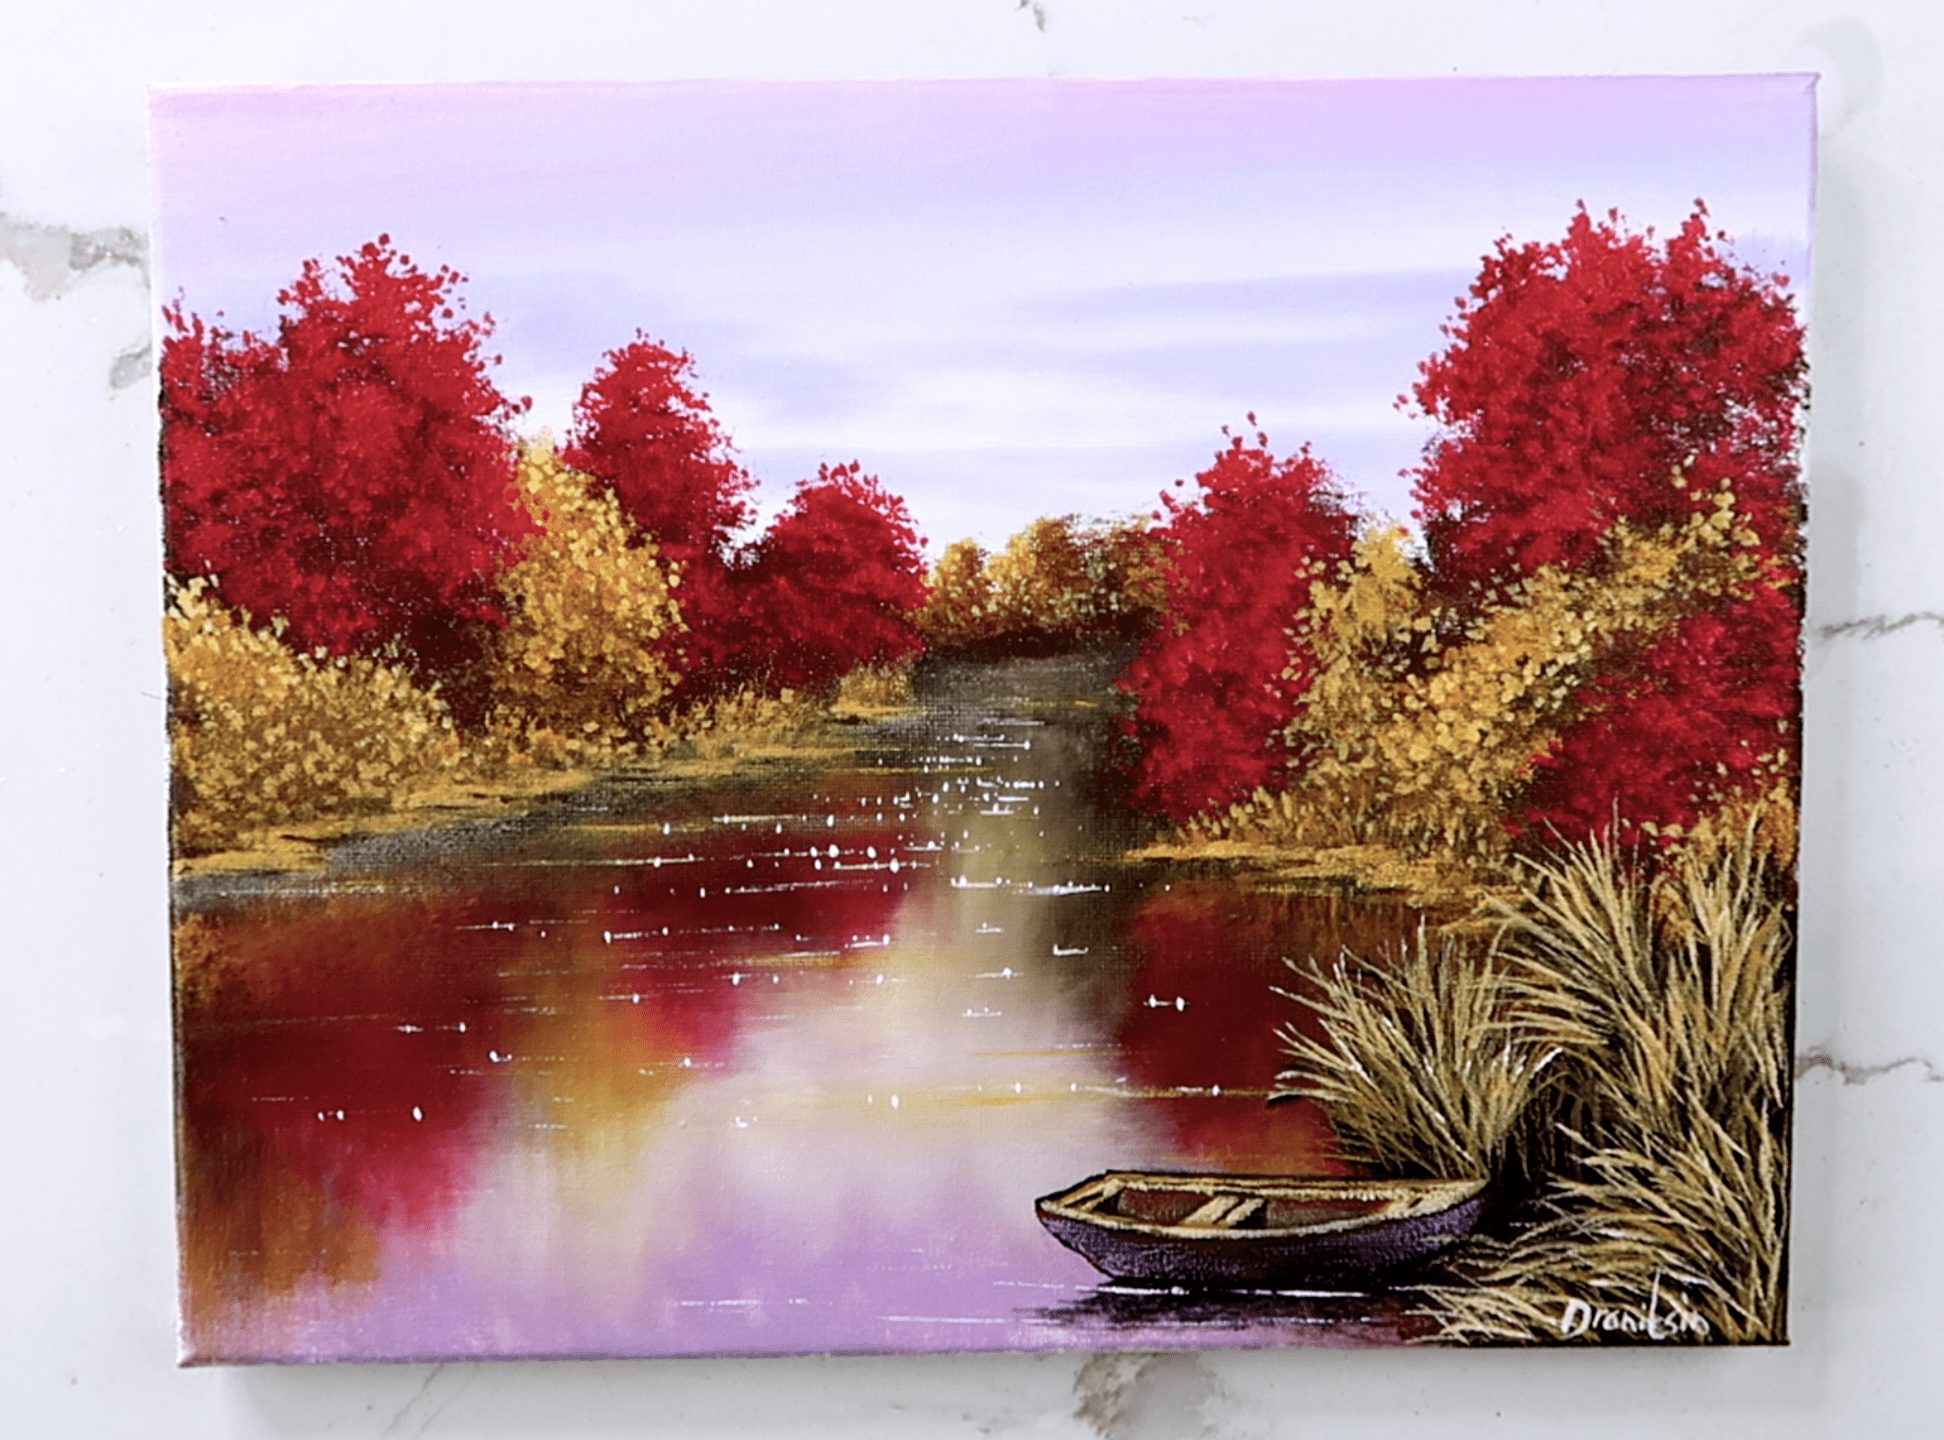 painting a fall landscape scene